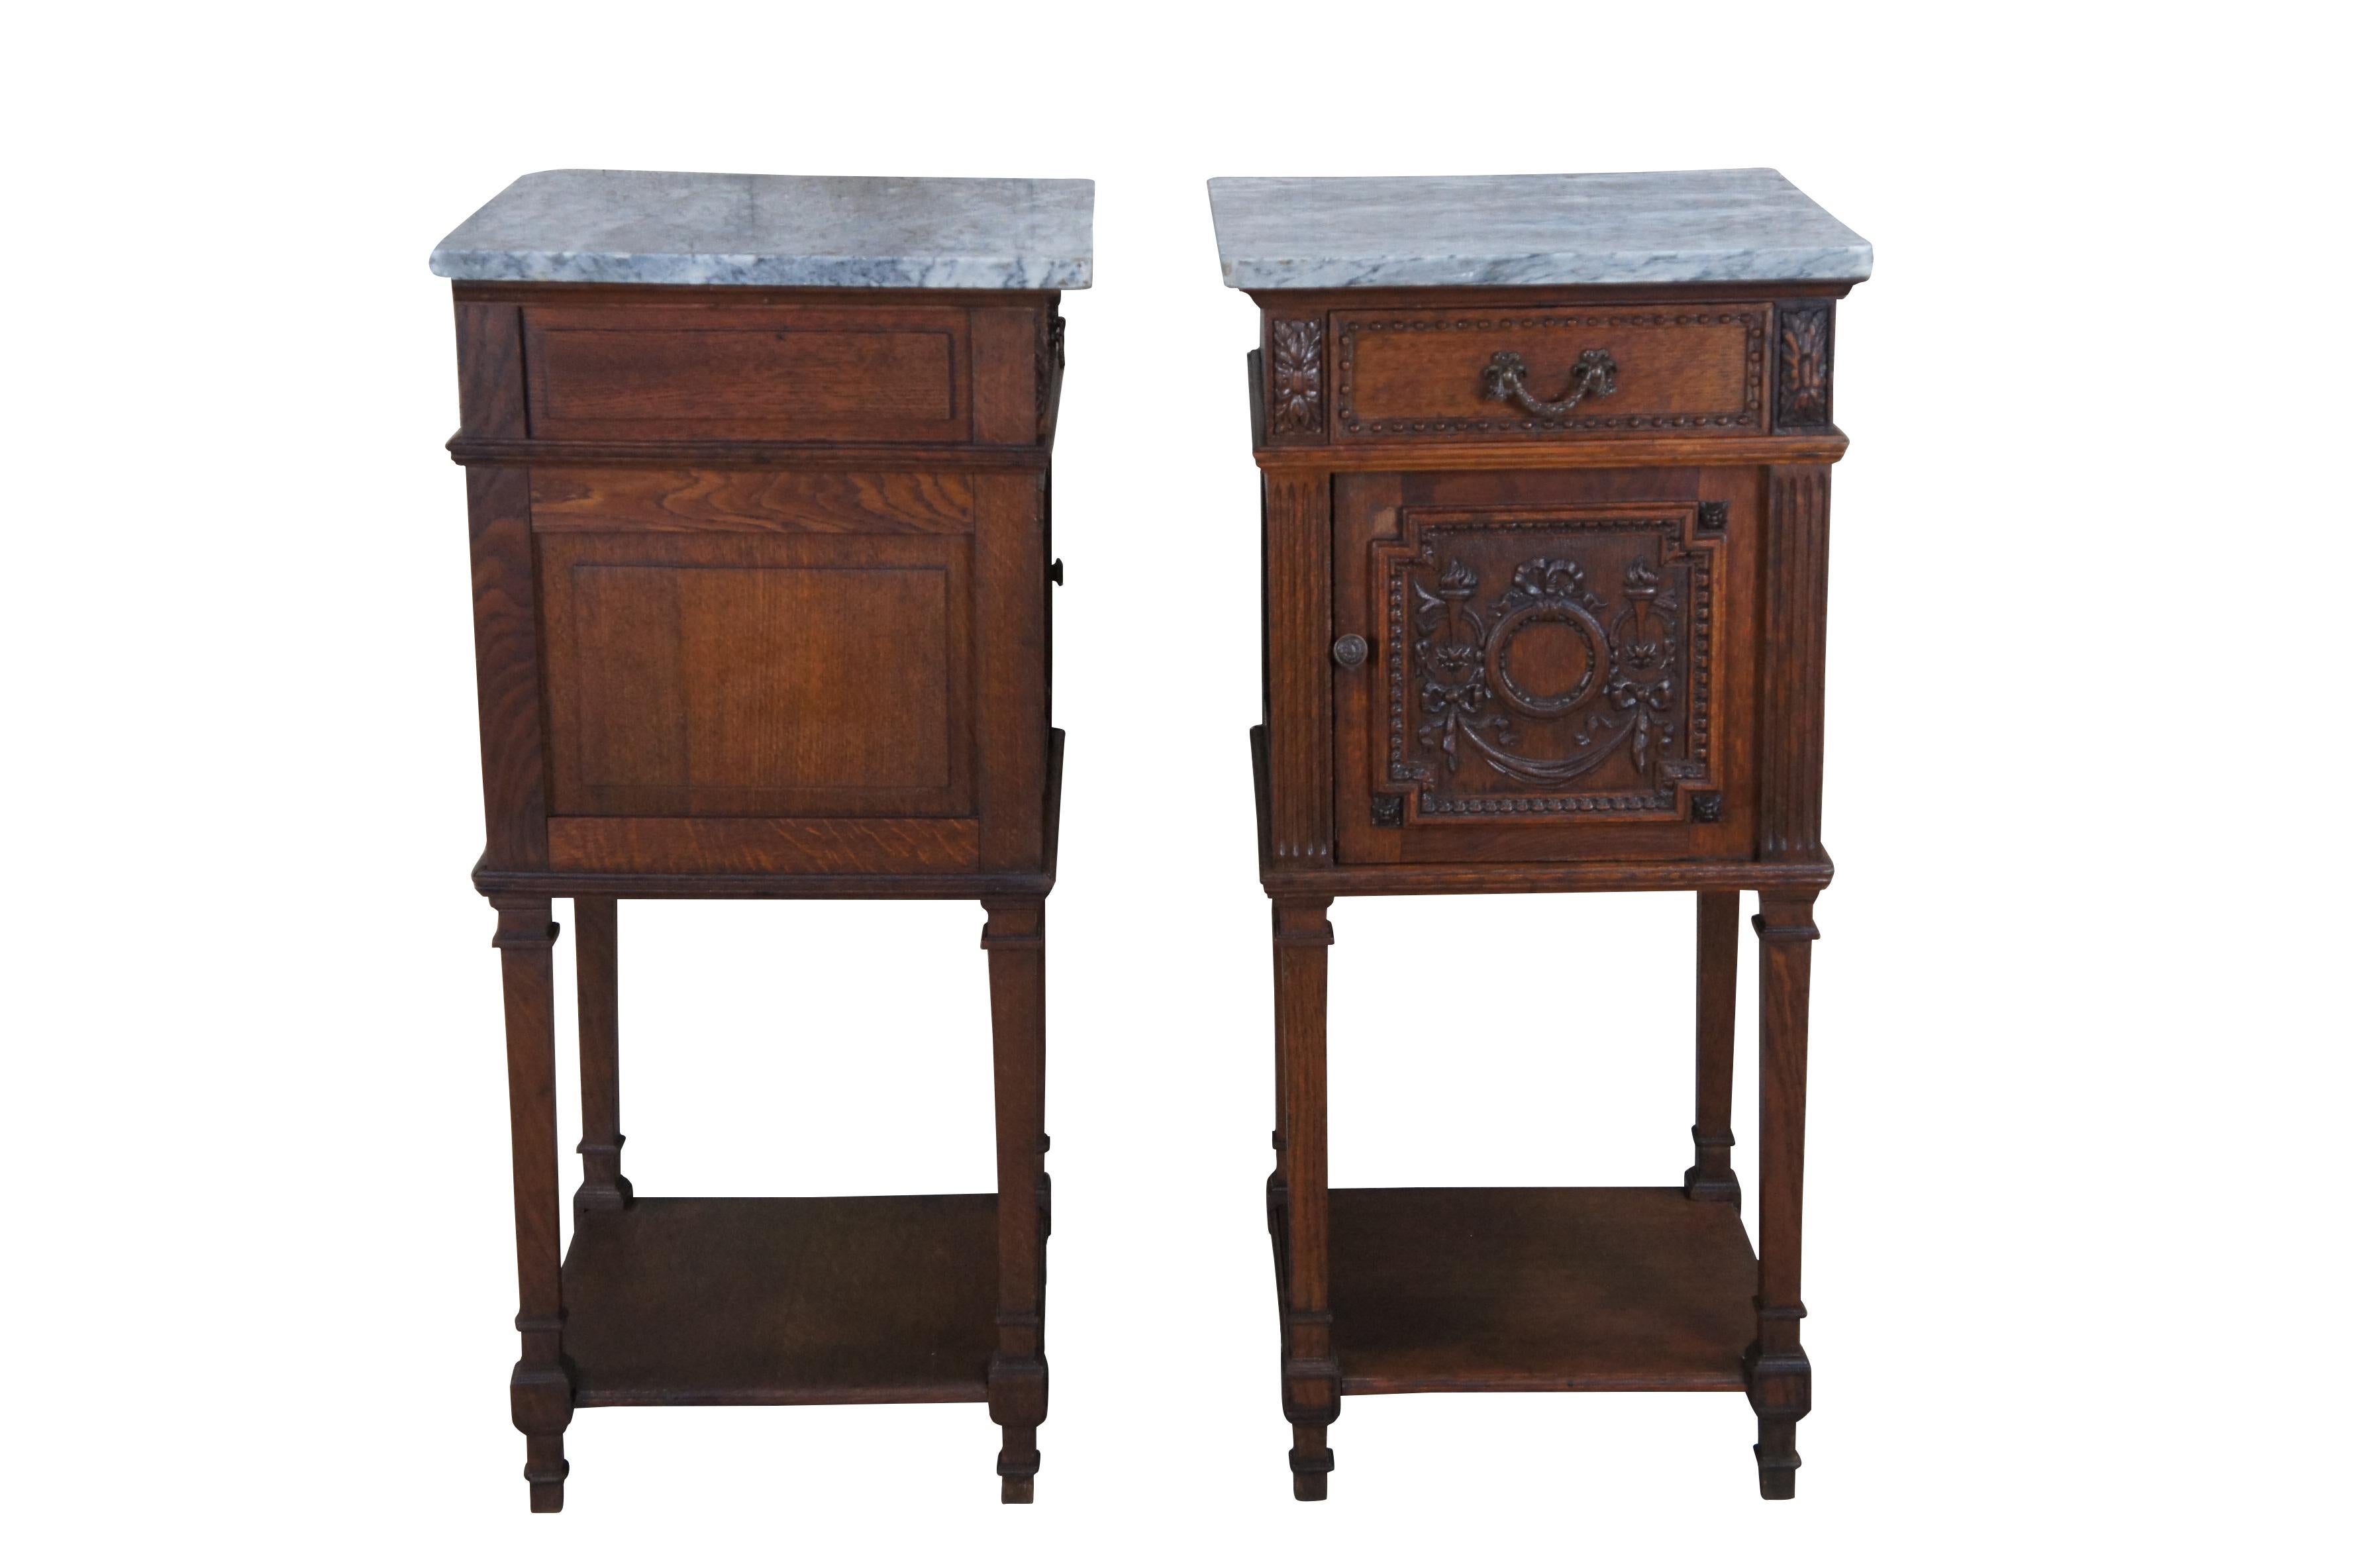 Two antique French tobacco humidor / smoke stands.  Made of quartersawn oak featuring a two tiered design with marble top and paneled Neoclassical torchiere / ribbon theme door. 

Dimensions
15.75